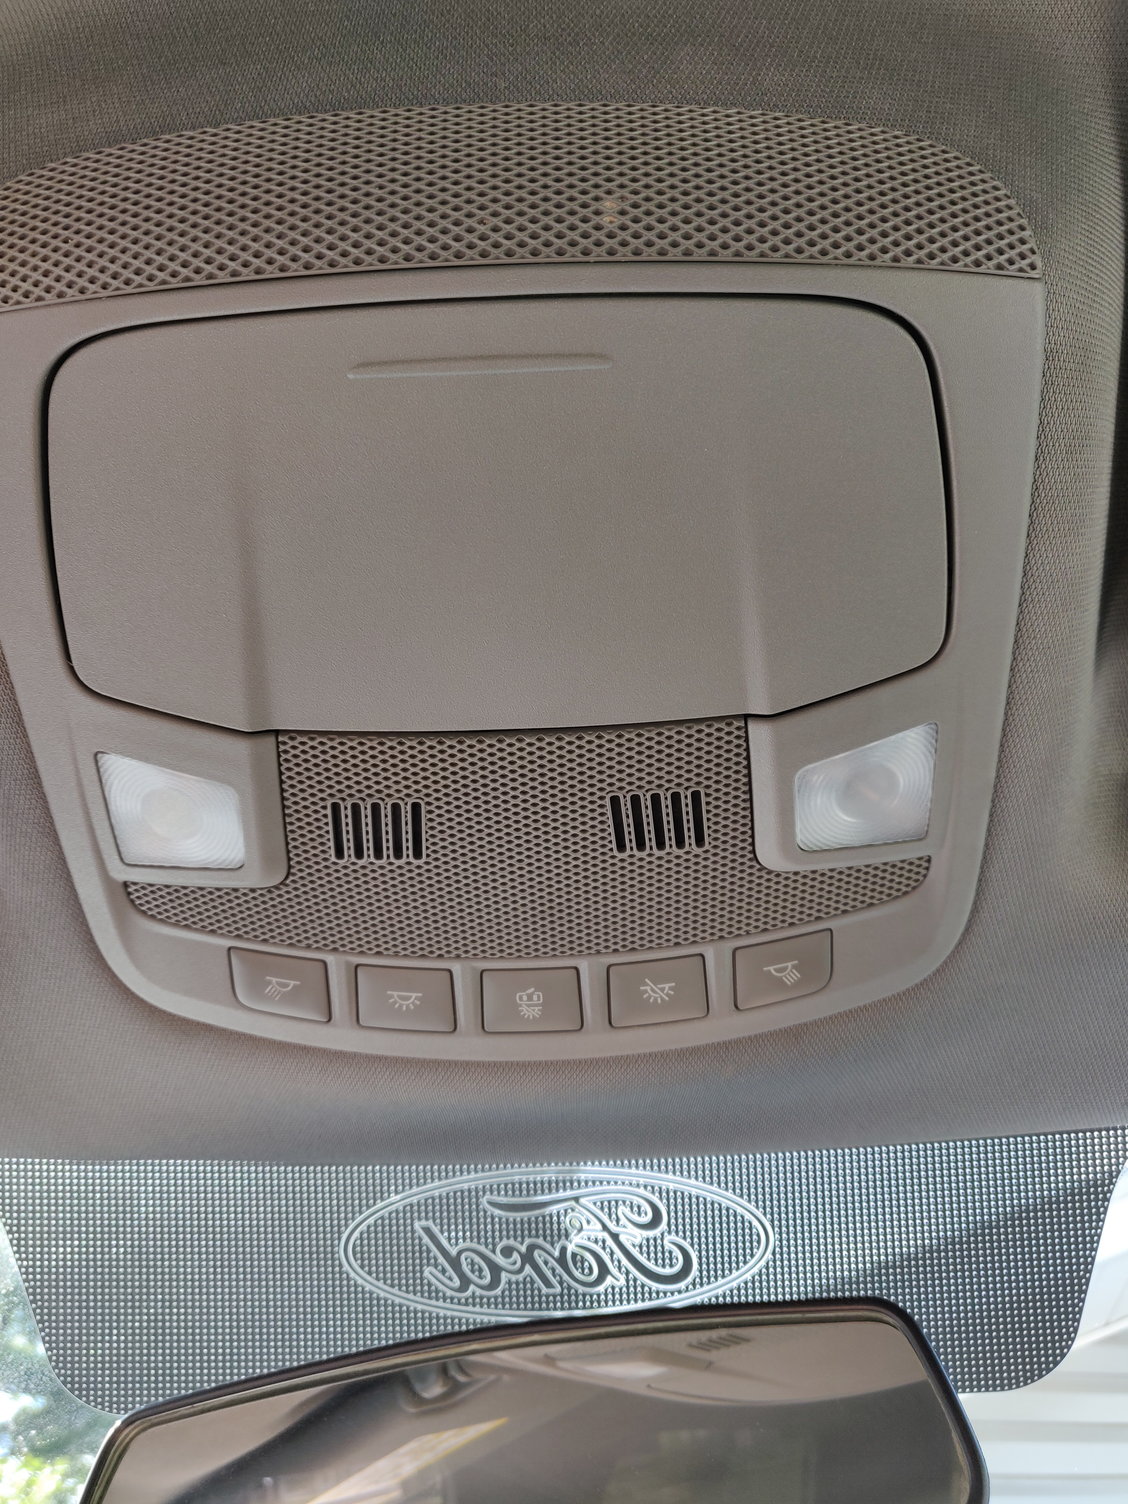 2017 Dome Lights Not Working Ford F150 Forum Community Of Truck Fans